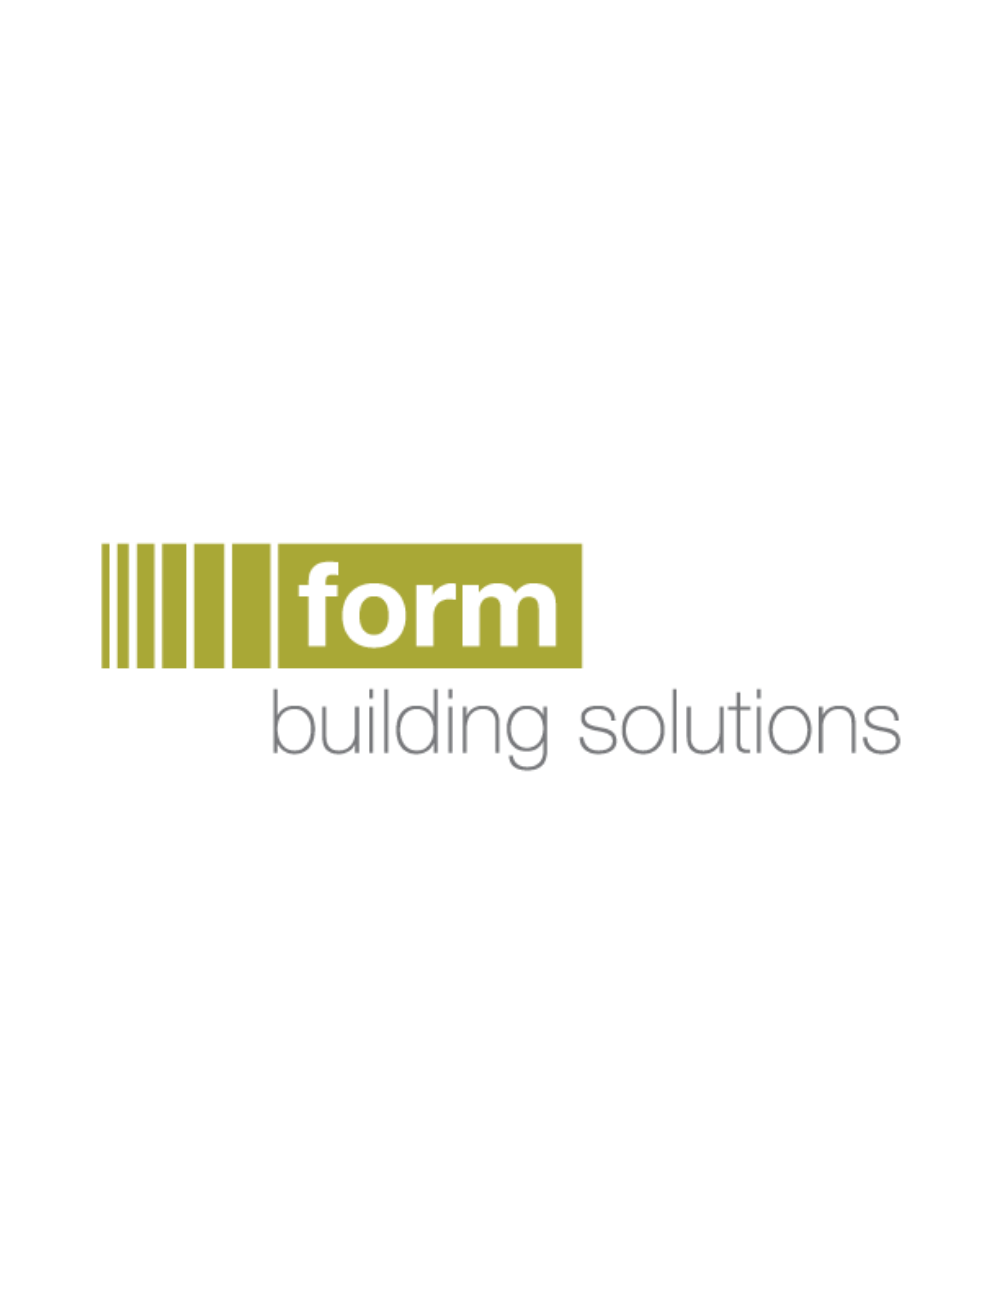 FORM Building Solutions